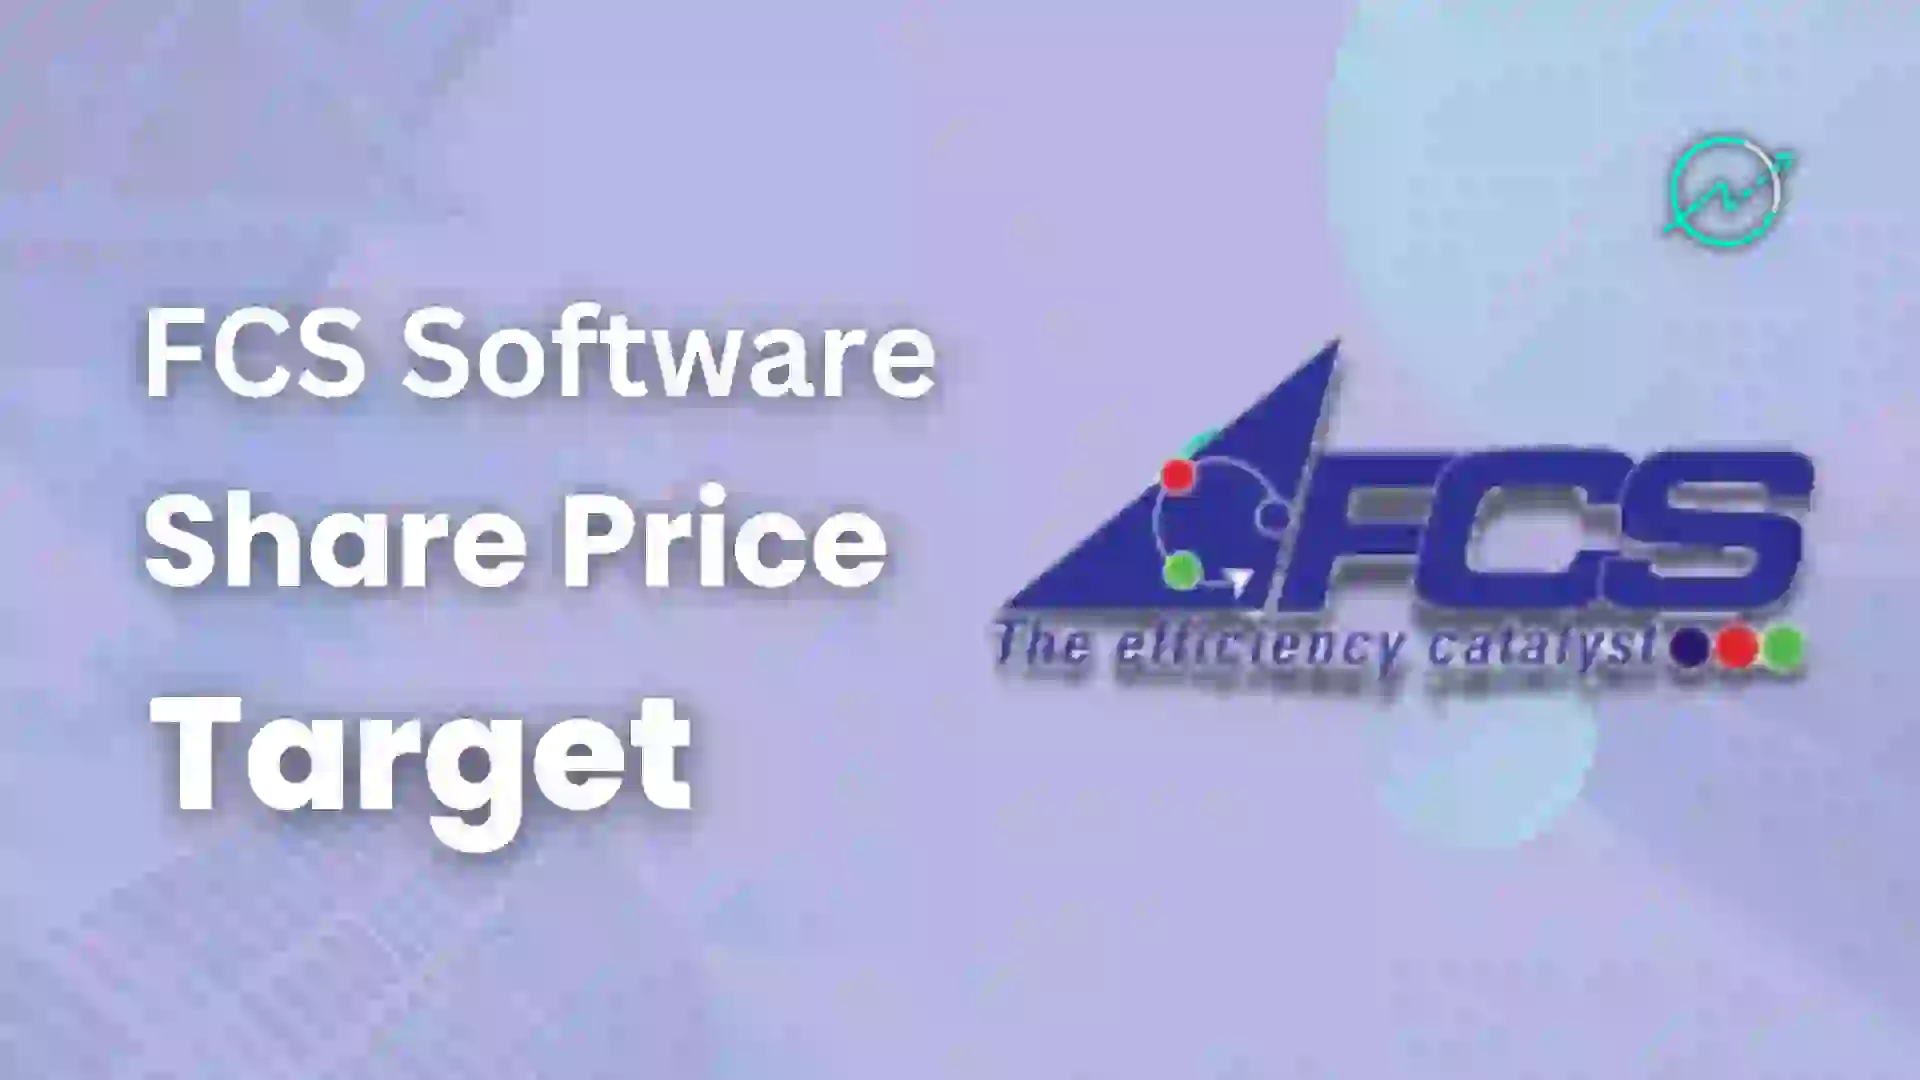 FCS Software Share Price Target 2023, 2024, 2025, 2026, 2030